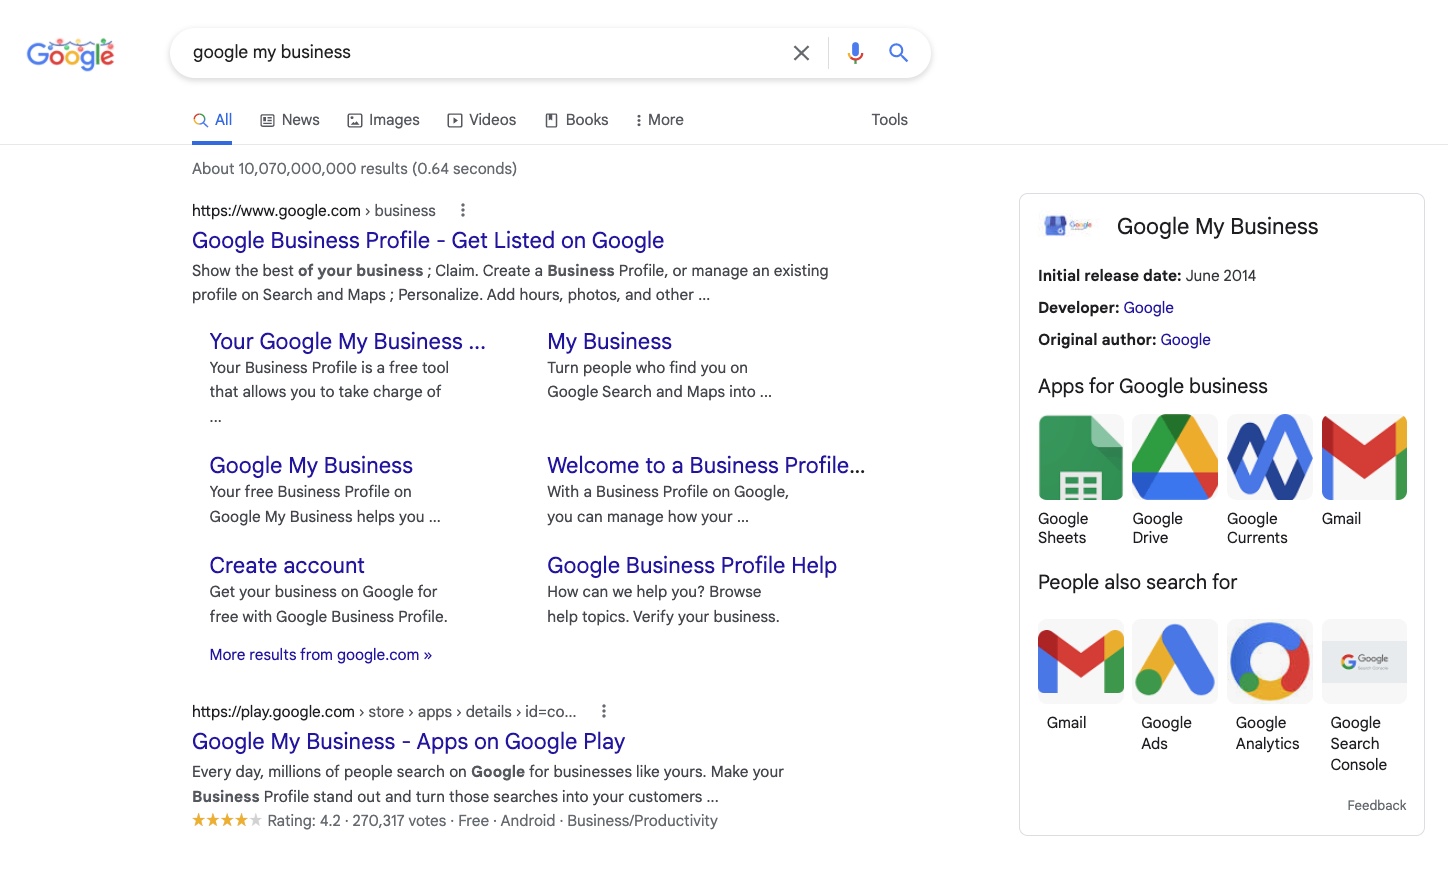 Here is a screenshot of the Google search results page. There we searched for the keyword "Google My Business". The first result is from Google itself, after that a user ask box appears. To the right of the normal search results is the info box.